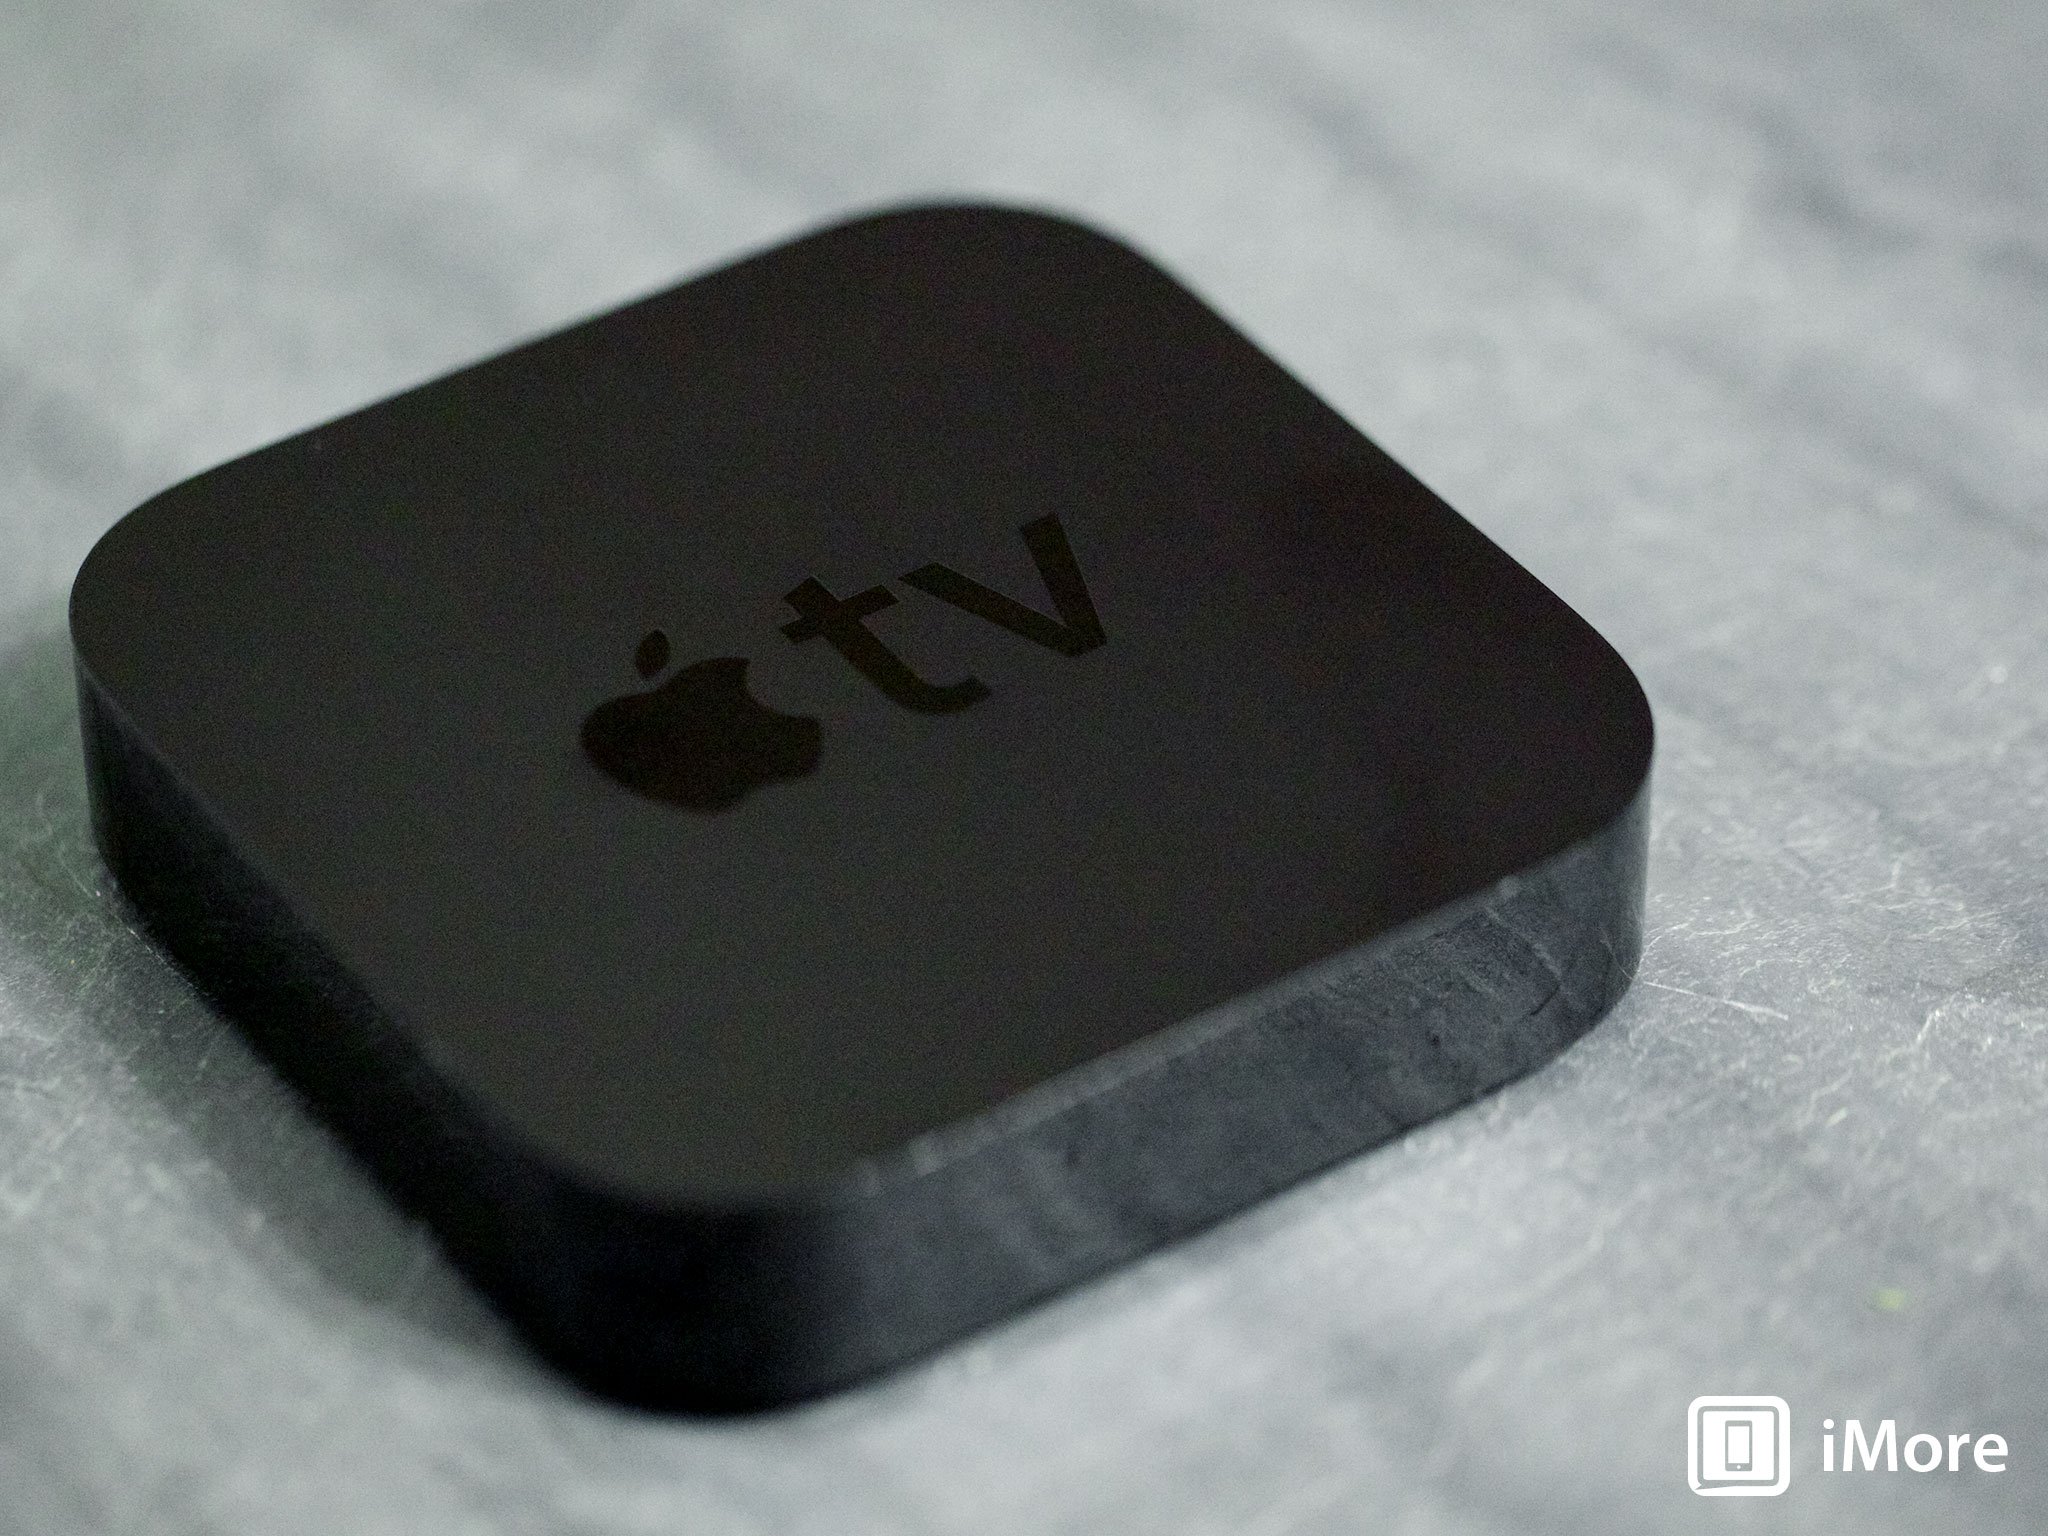 Apple offering iTunes gift cards with Apple TV purchase, new Apple TV just around the corner?